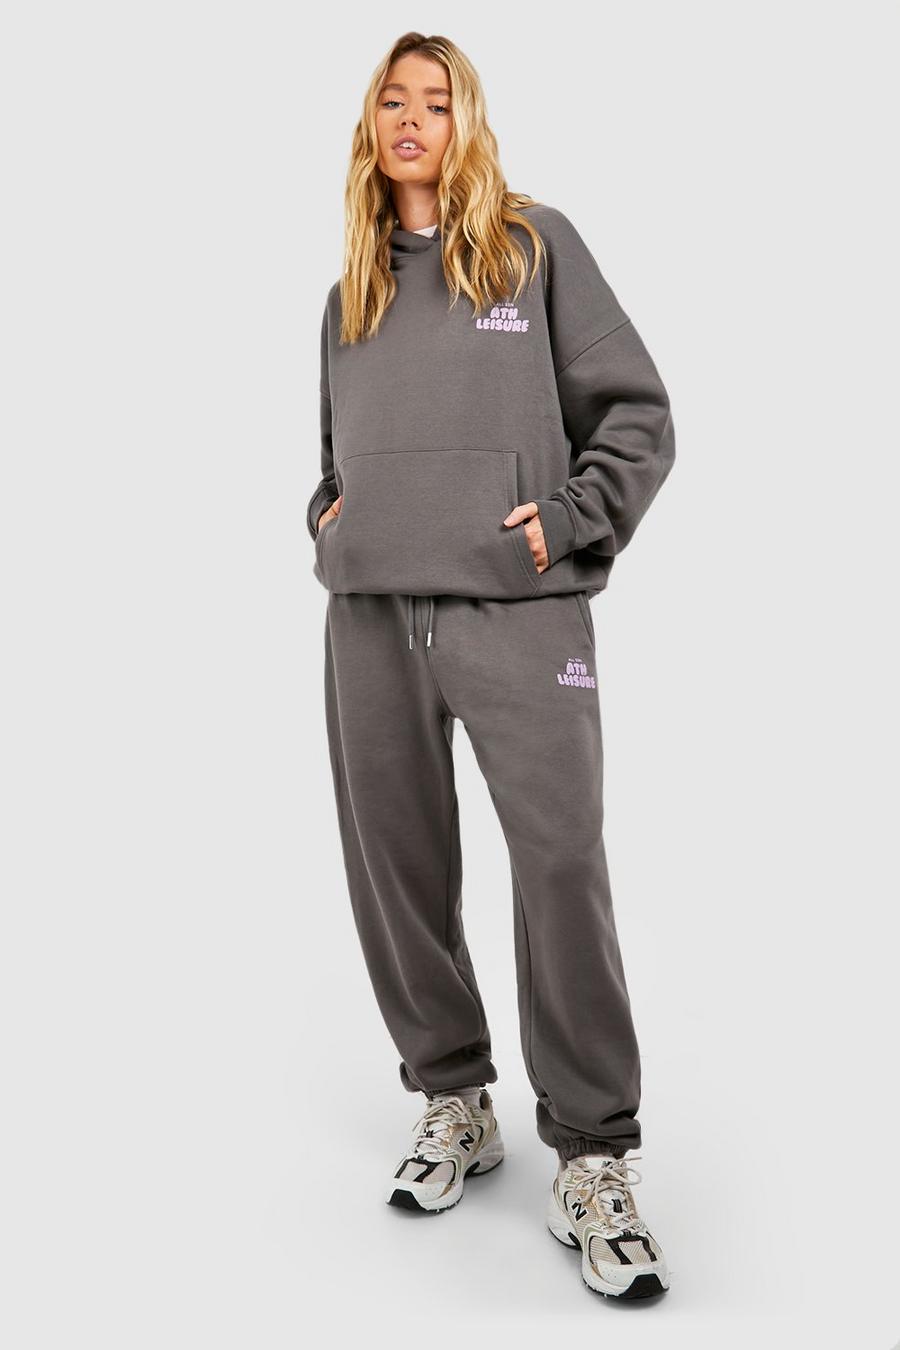 Charcoal grey Athleisure Puff Print Slogan Hooded Tracksuit